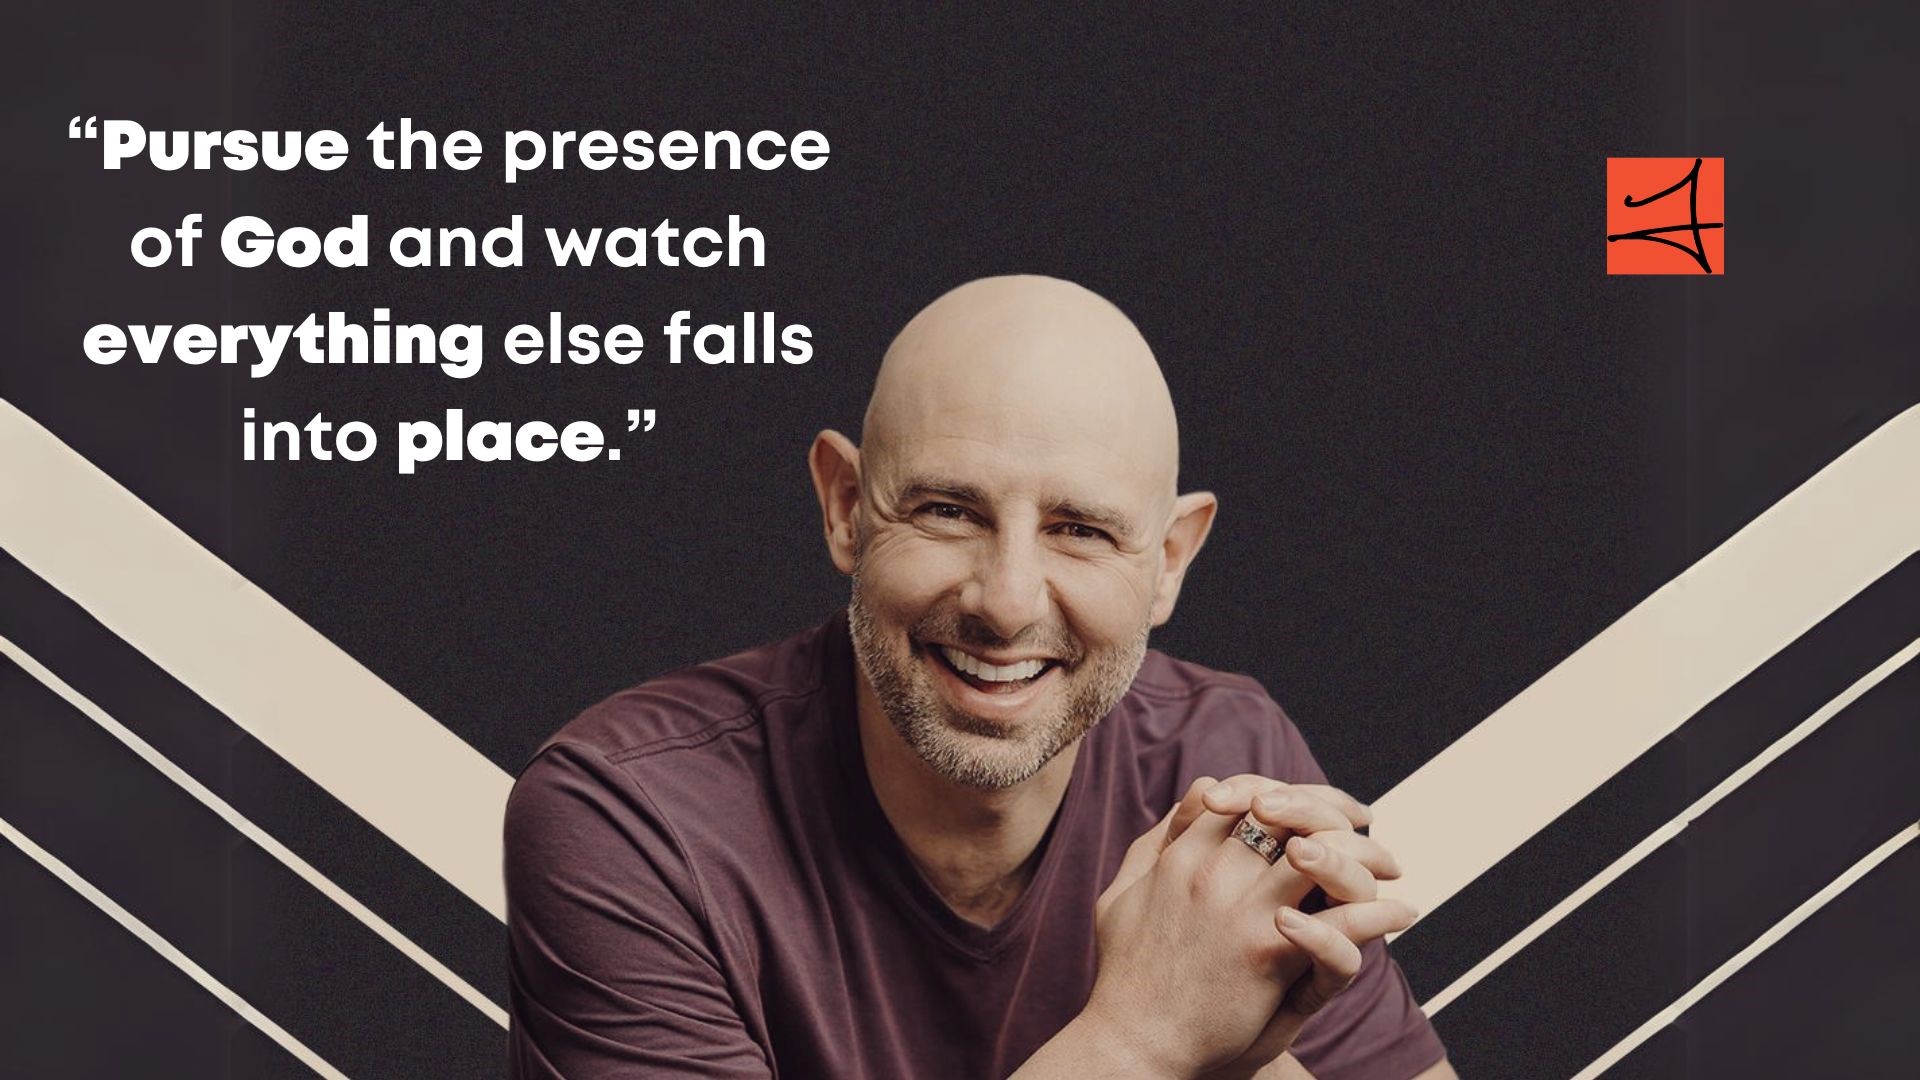 Pursue the presence of God and watch everything else fall into place.